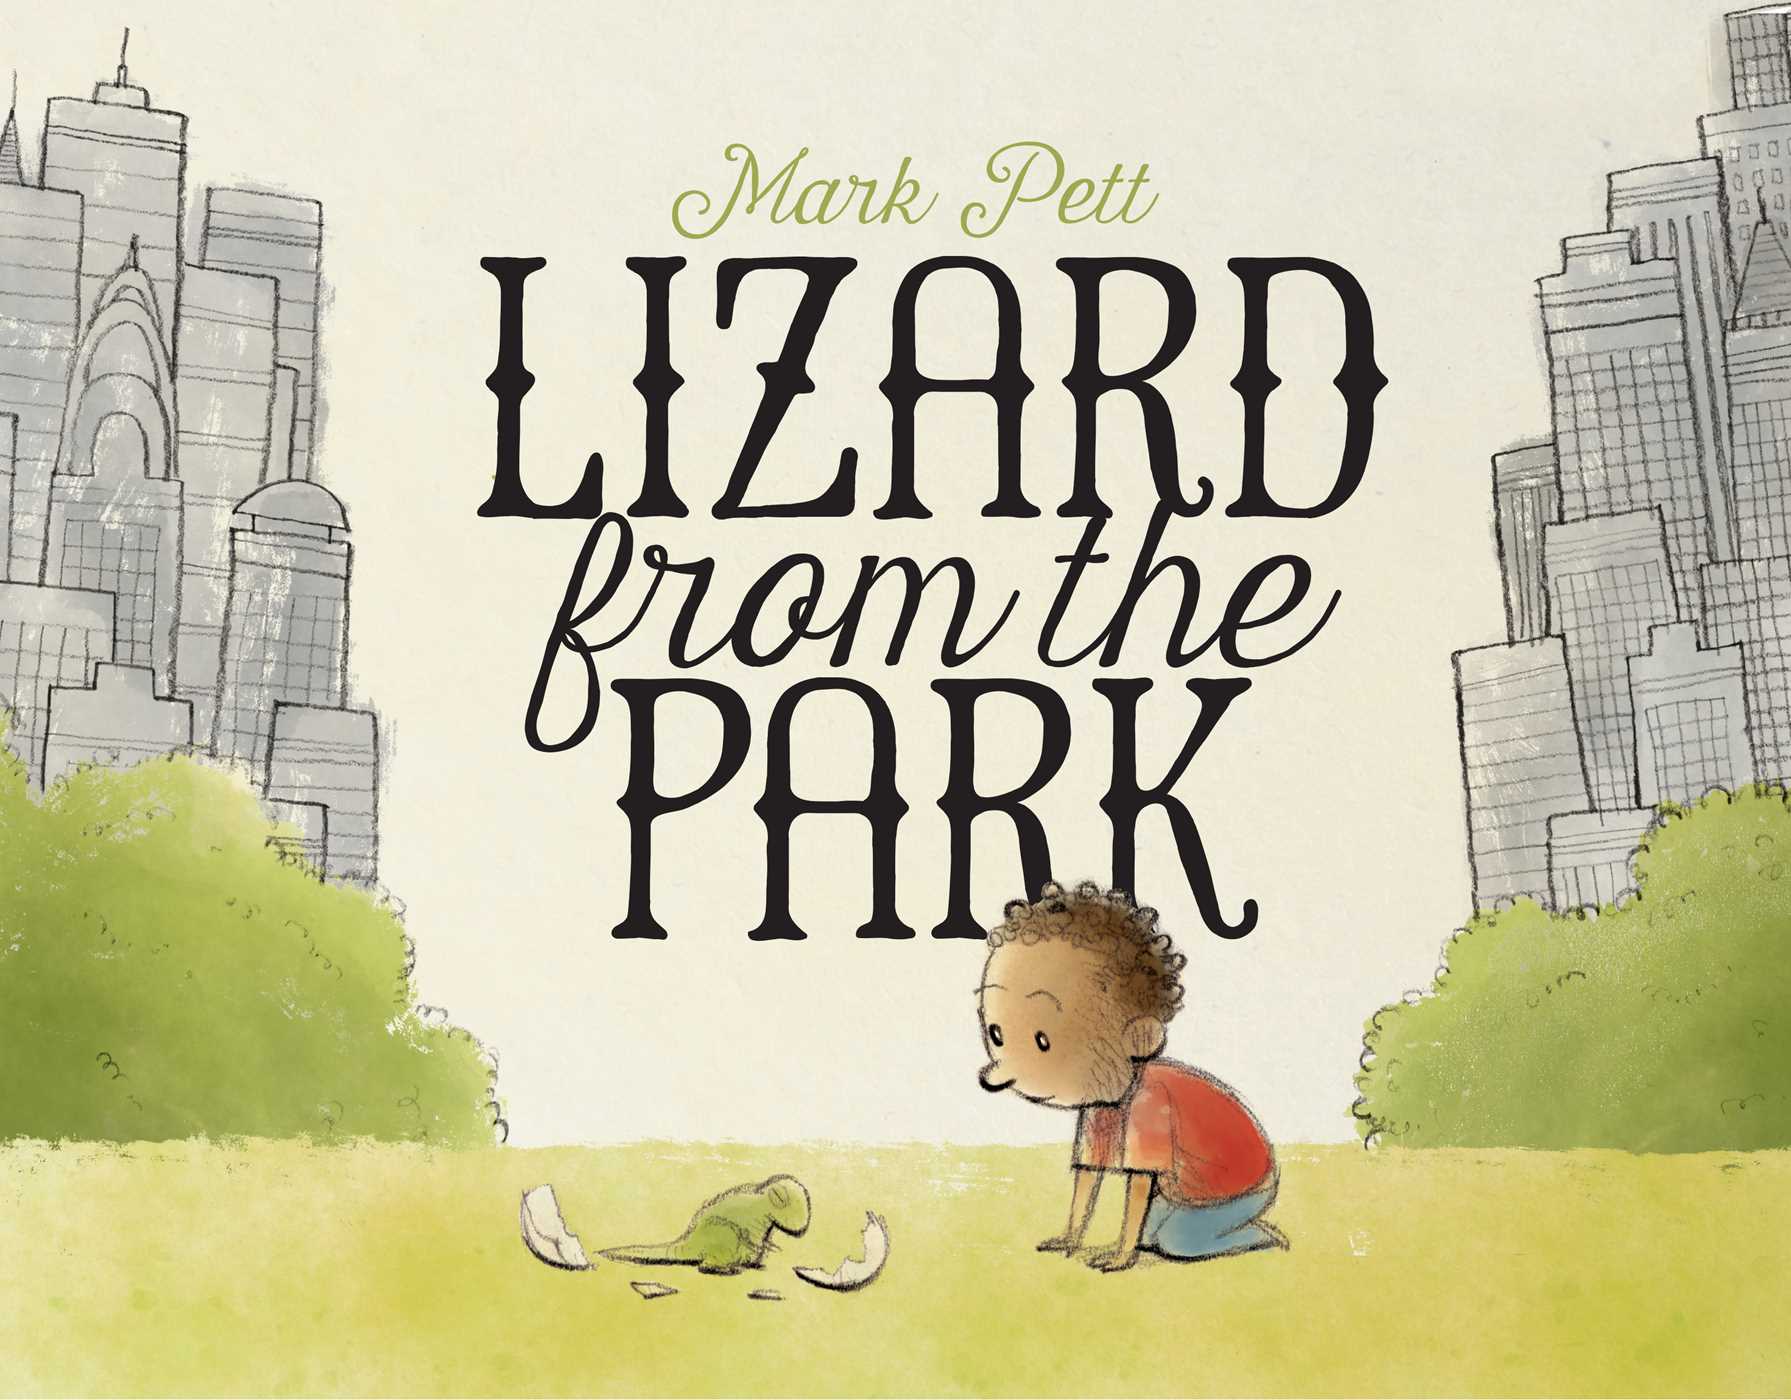 Lizard+from+the+Park